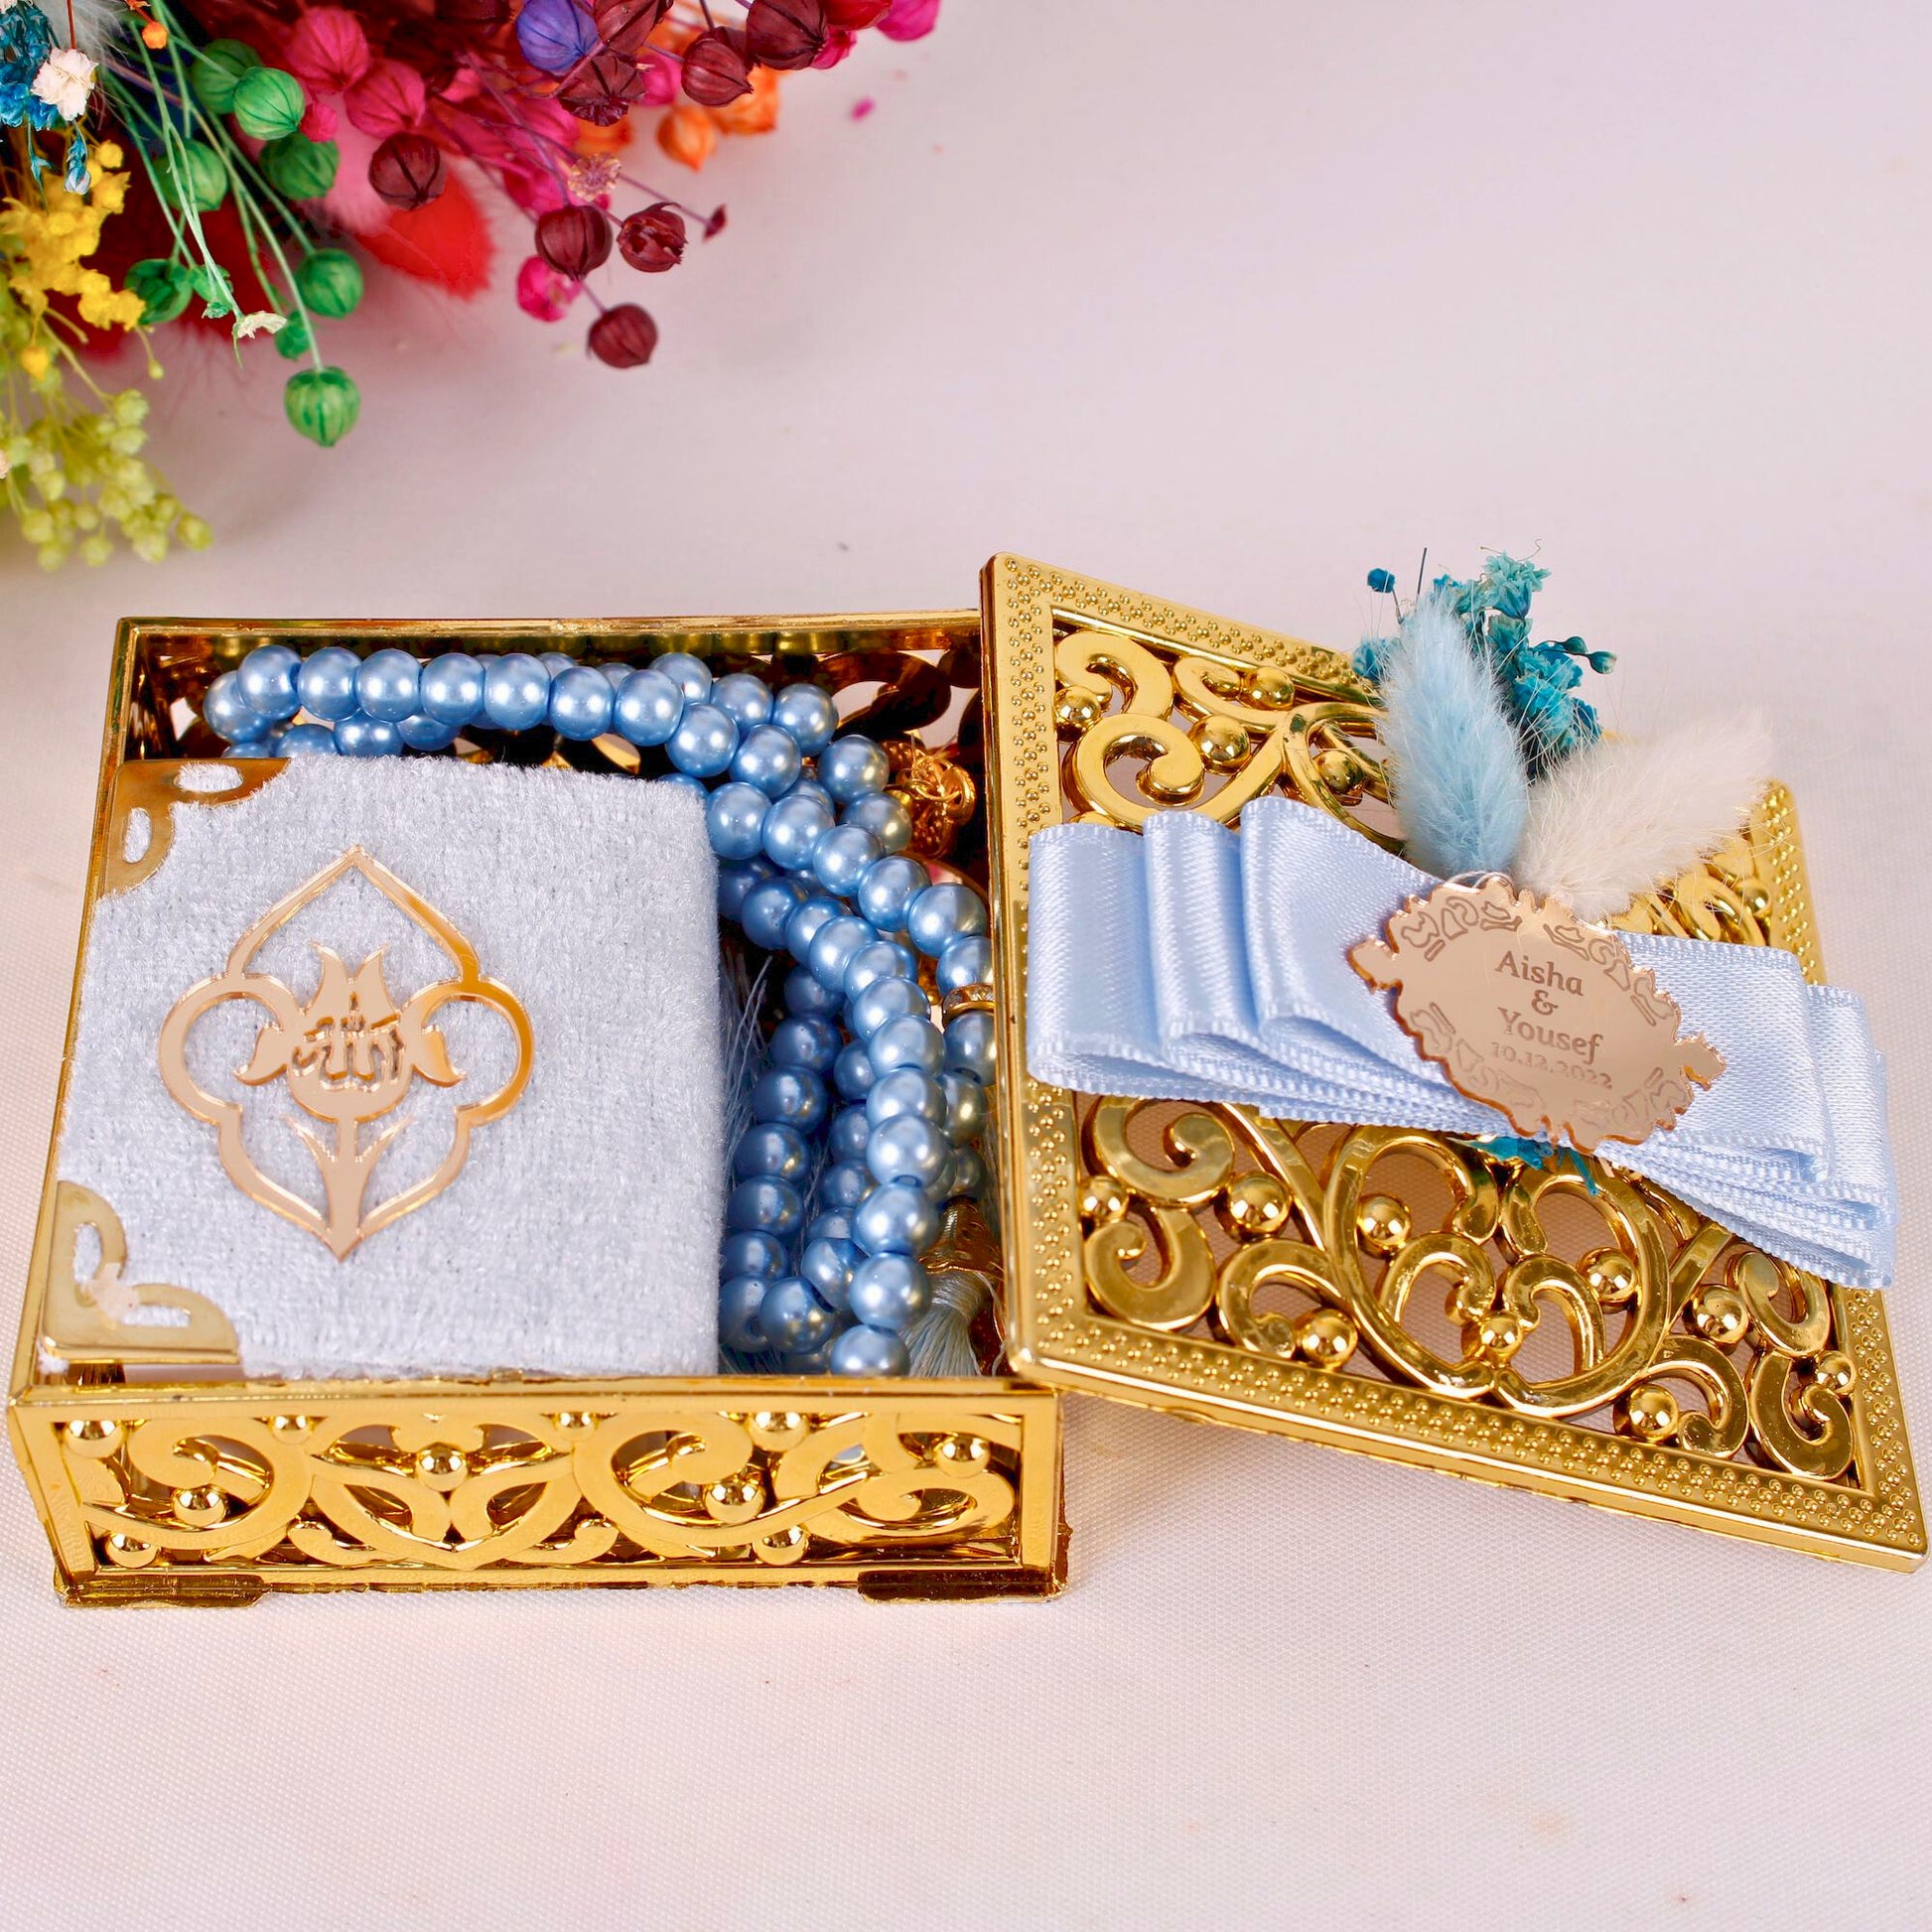 Personalized Luxury Mini Quran Tasbeeh with Dried Flower Wedding Favor - Islamic Elite Favors is a handmade gift shop offering a wide variety of unique and personalized gifts for all occasions. Whether you're looking for the perfect Ramadan, Eid, Hajj, wedding gift or something special for a birthday, baby shower or anniversary, we have something for everyone. High quality, made with love.